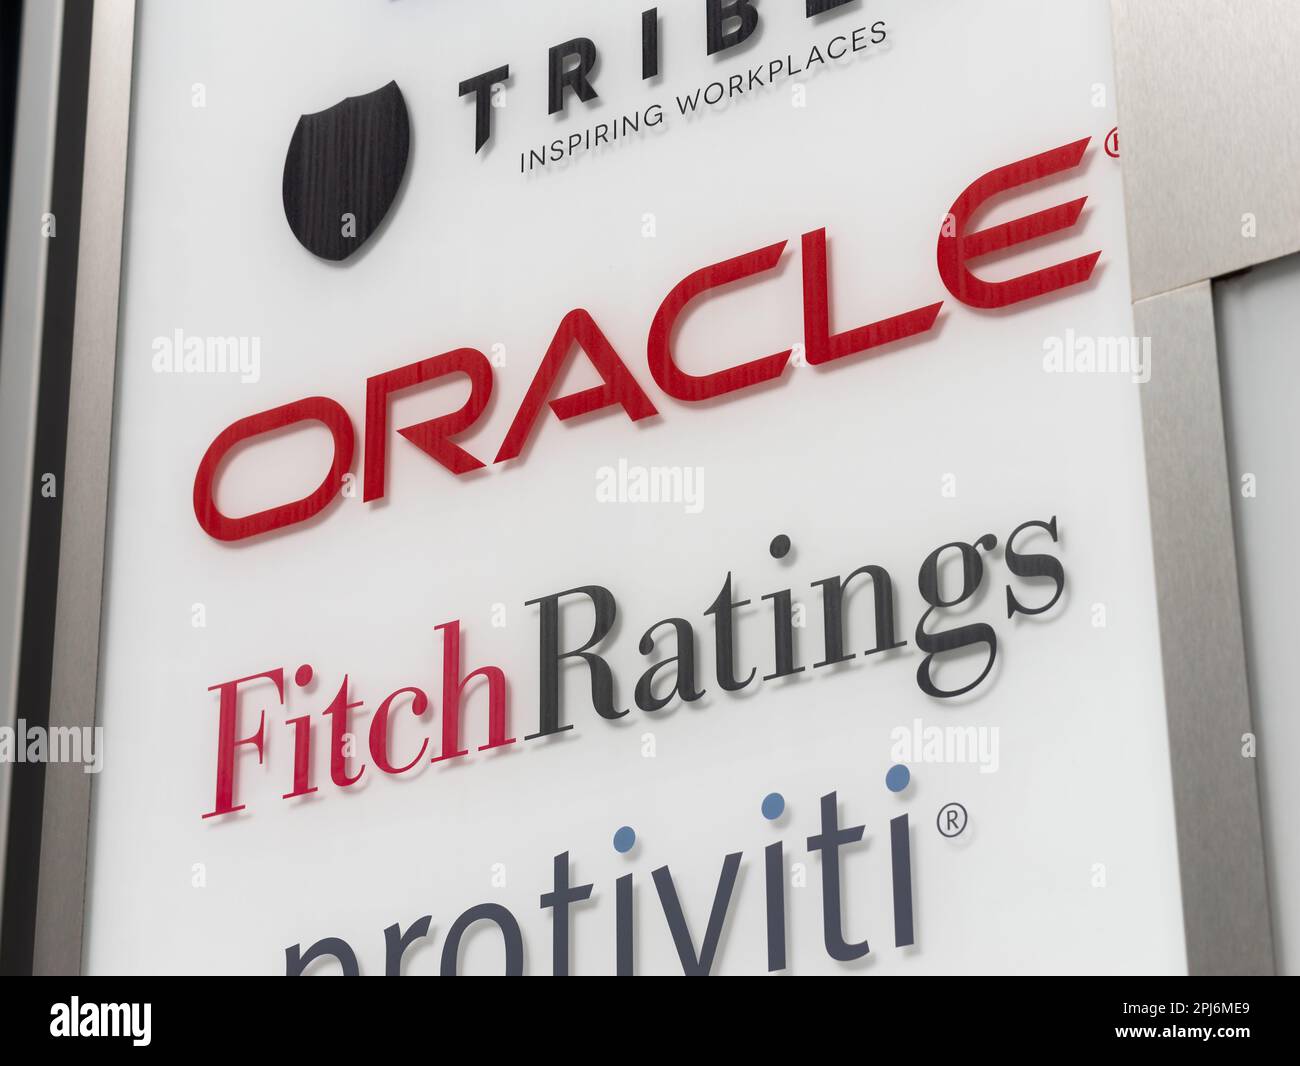 Oracle corporation and Fitch Ratings logo sign on the entrance of an office complex. American computer technology company and a credit rating agency. Stock Photo